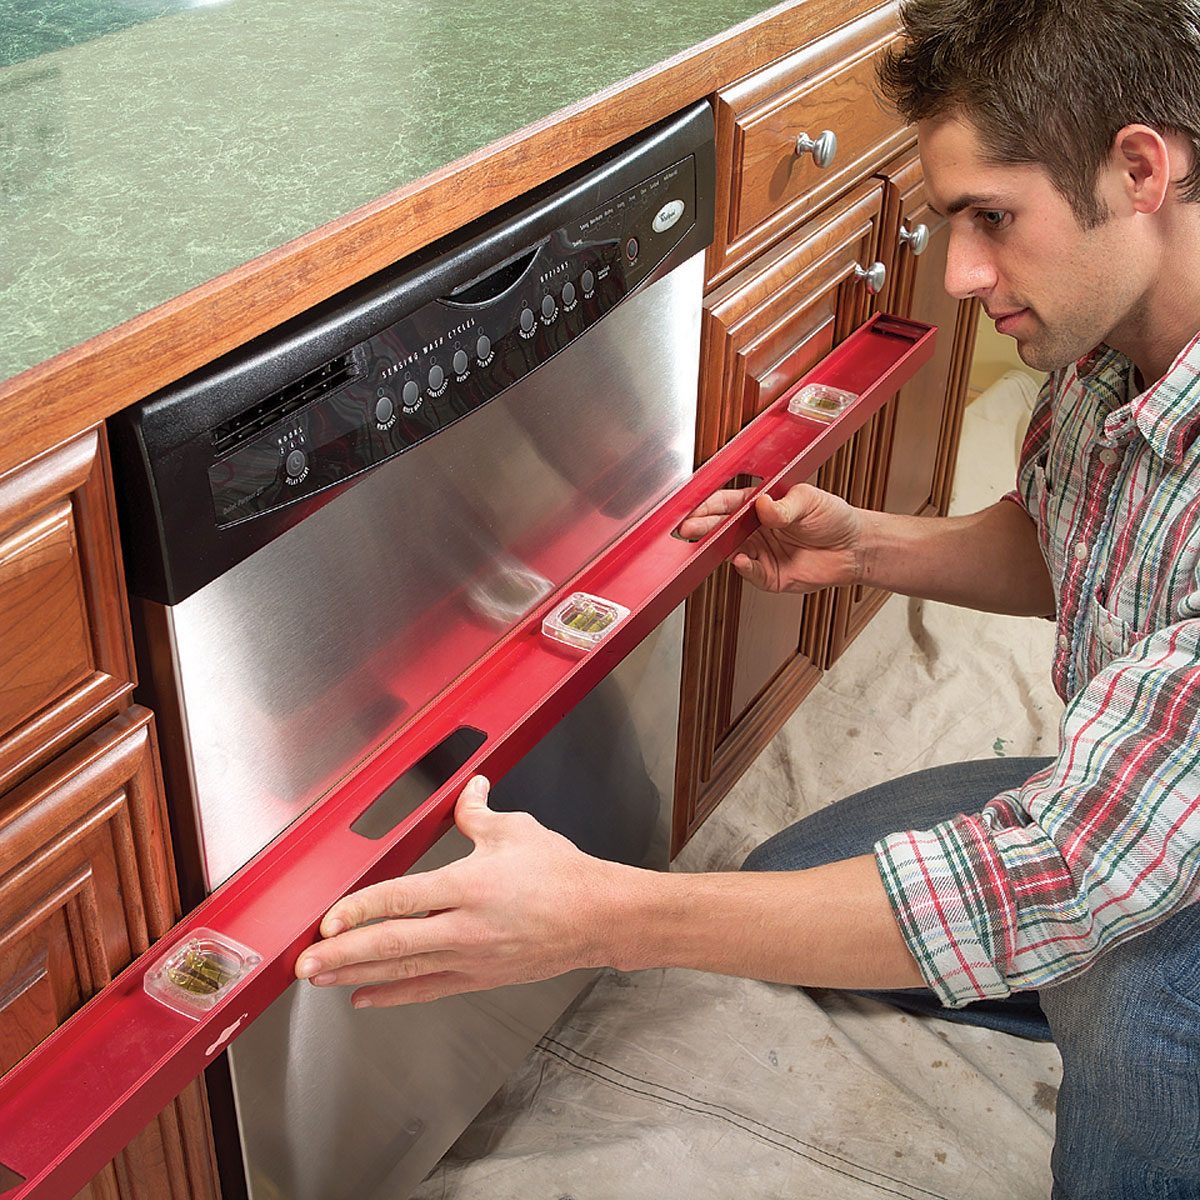 How To Replace A Dishwasher aligh the new dishwasher